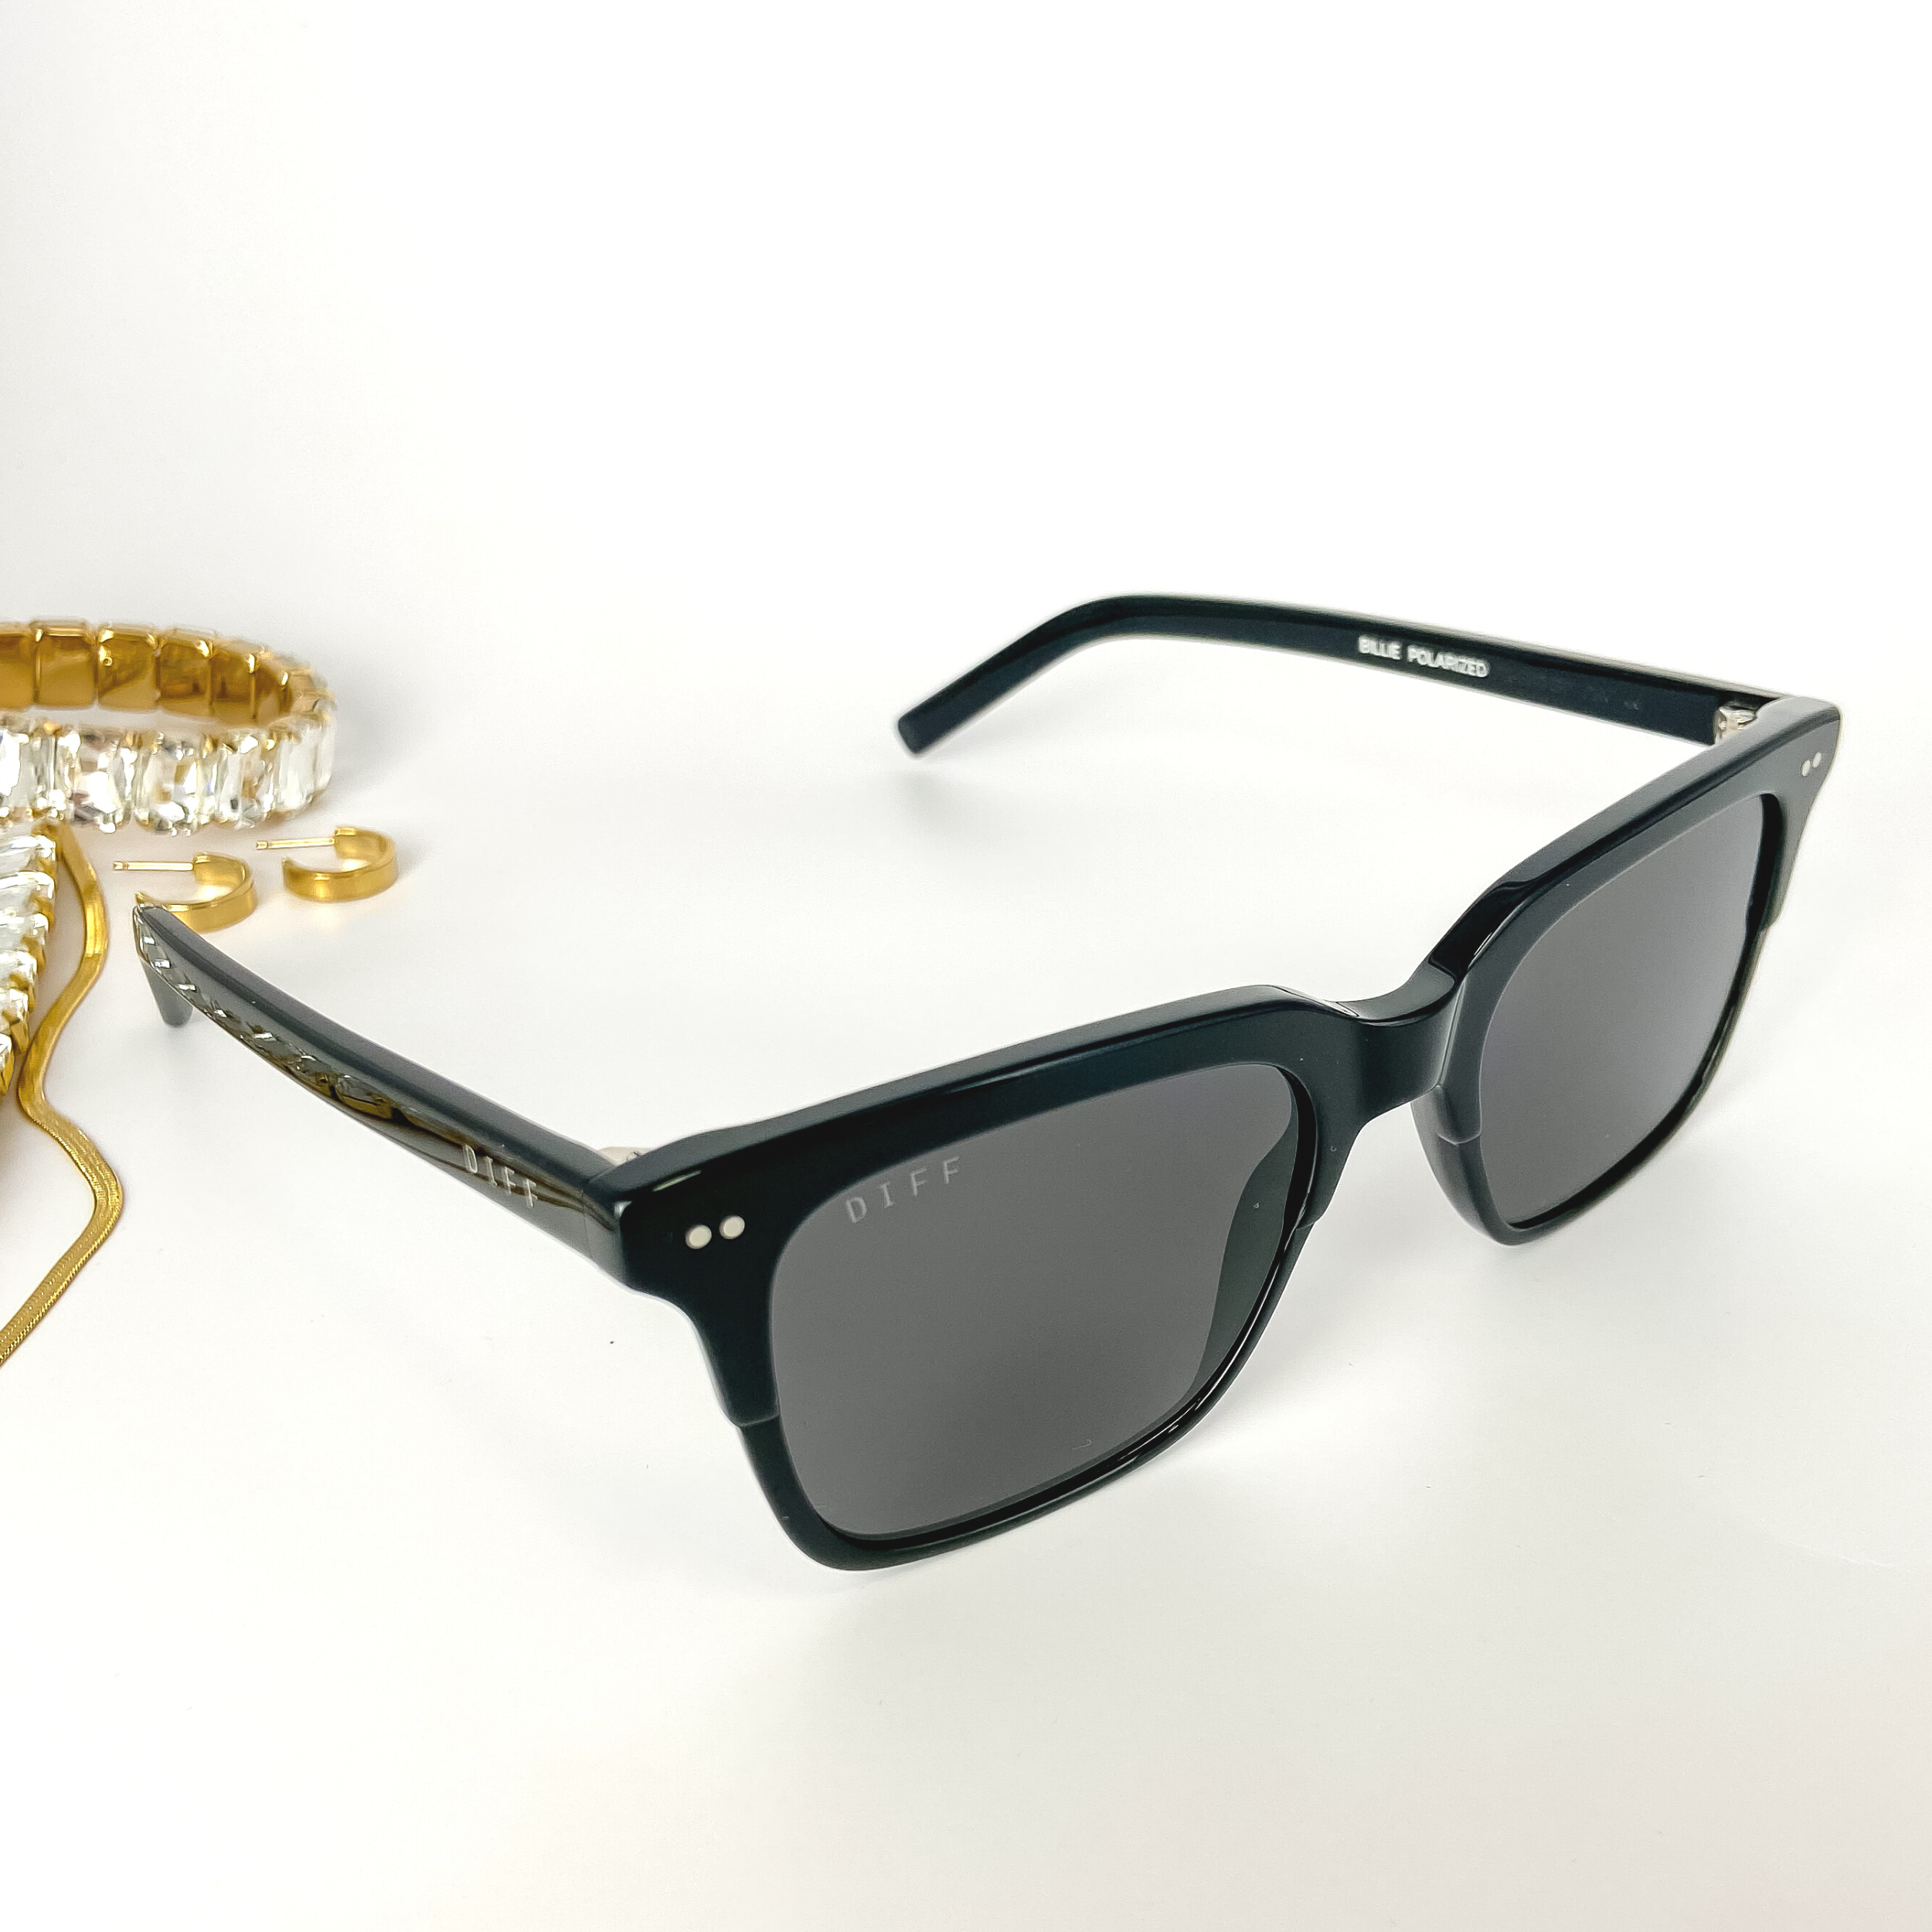 A pair of black sunglasses with black lenses. These sunglasses are pictured on a white background with gold jewelry.